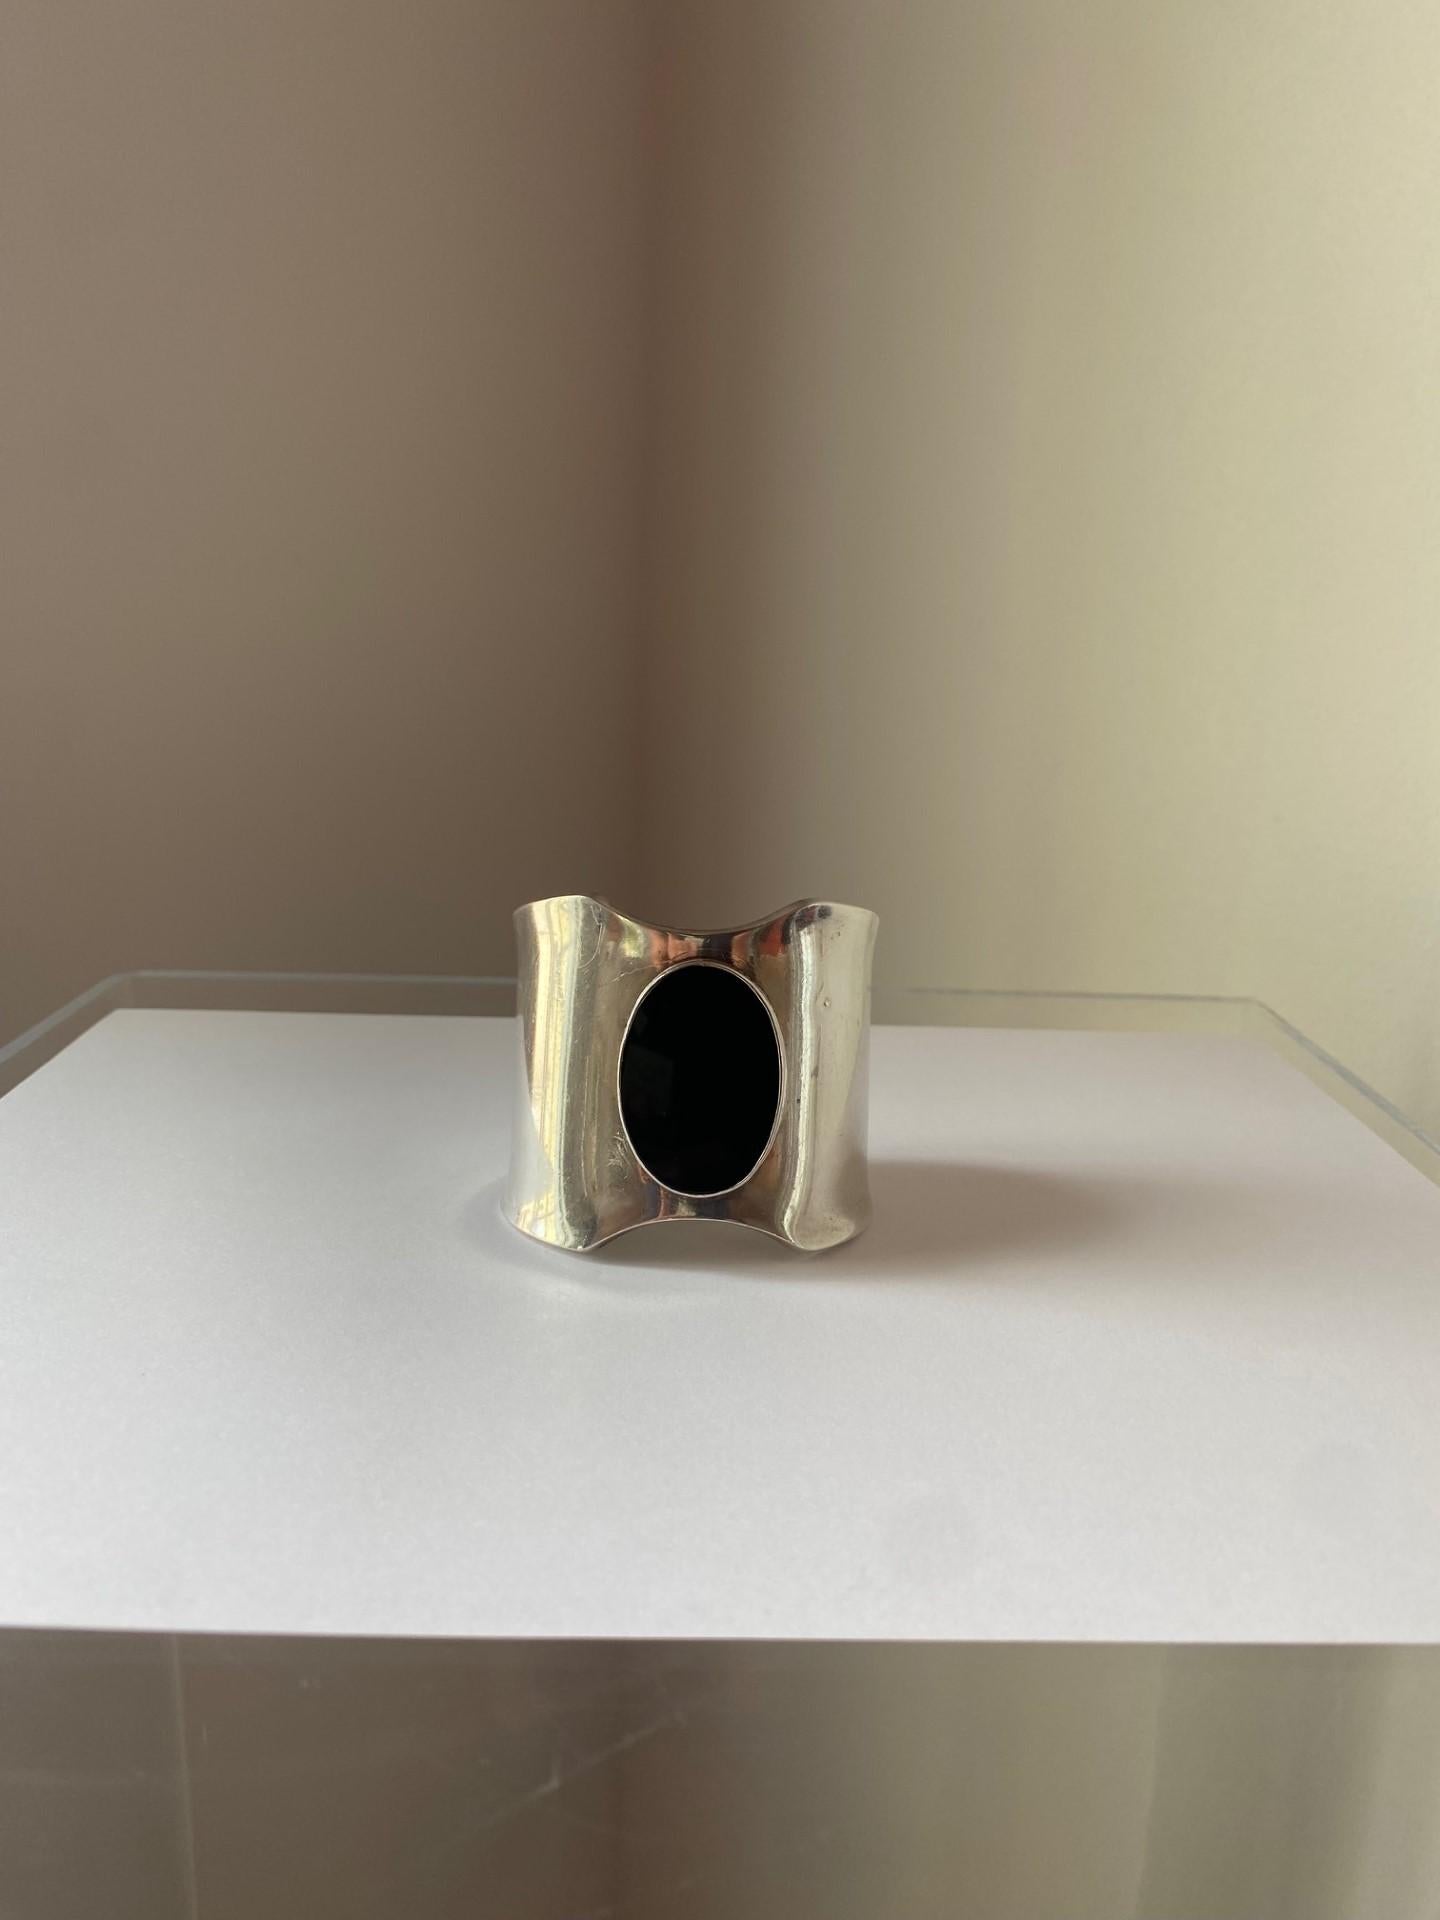 Incredibly chic and modernist bracelet cuff in Silver and Onyx by Los Ballesteros Mexico. This beautiful piece is sculptural and organic.  Created by Los Ballesteros in Mexico, with craftsmanship and style that is a legacy.  This modernist piece